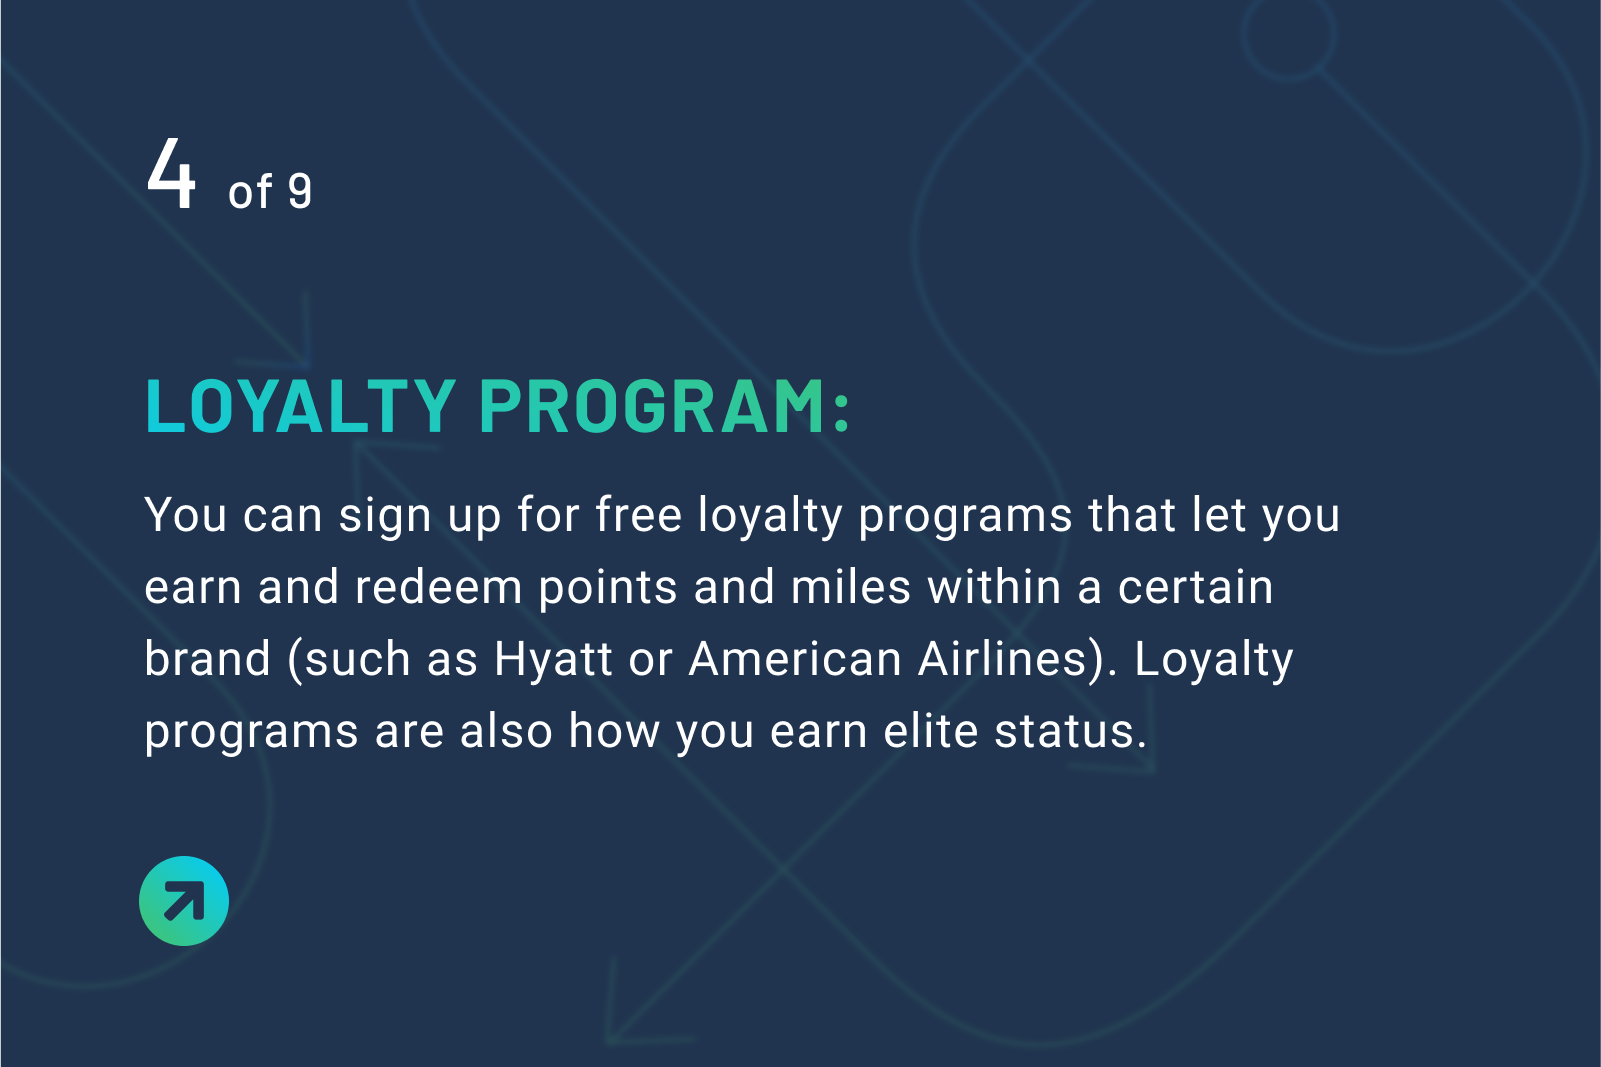 Loyalty program definition: You can sign up for free loyalty programs that let you earn and redeem points and miles within a certain brand (such as Hyatt or American Airlines). Loyalty programs are also how you earn elite status.